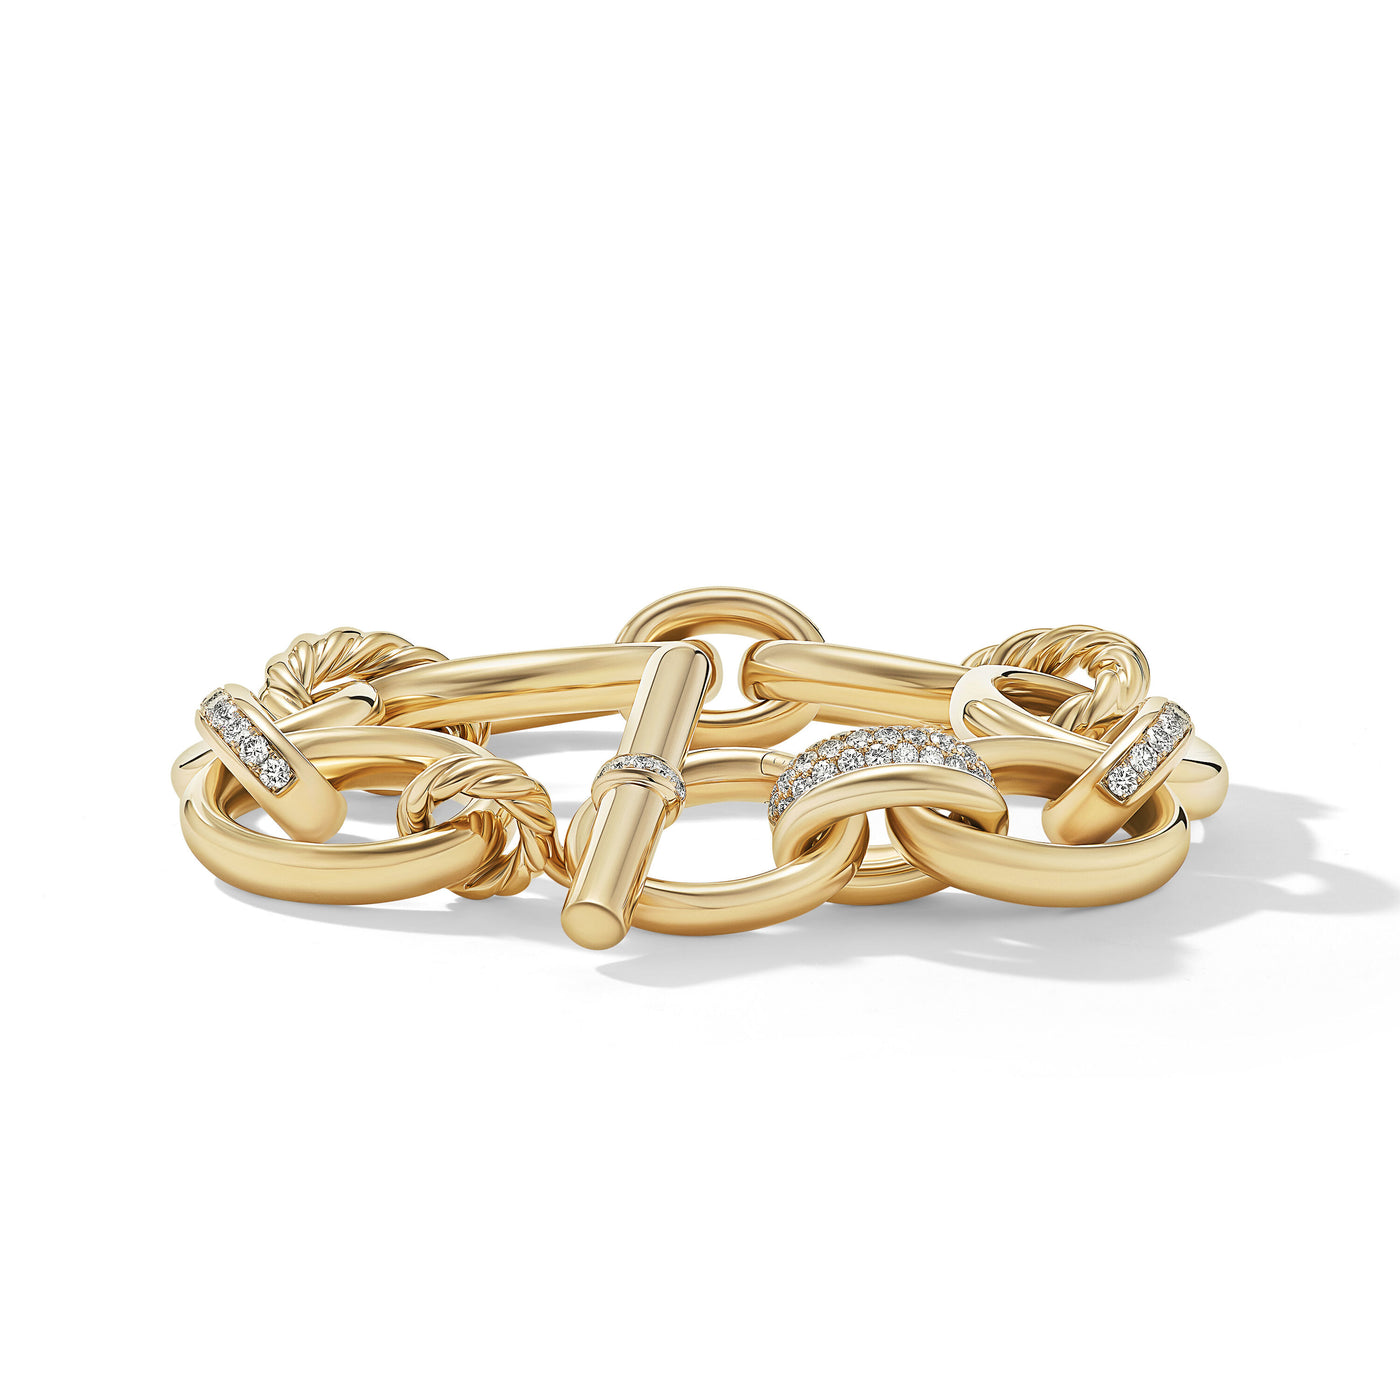 DY Mercer™ Chain Bracelet in 18K Yellow Gold with Diamonds\, 25mm